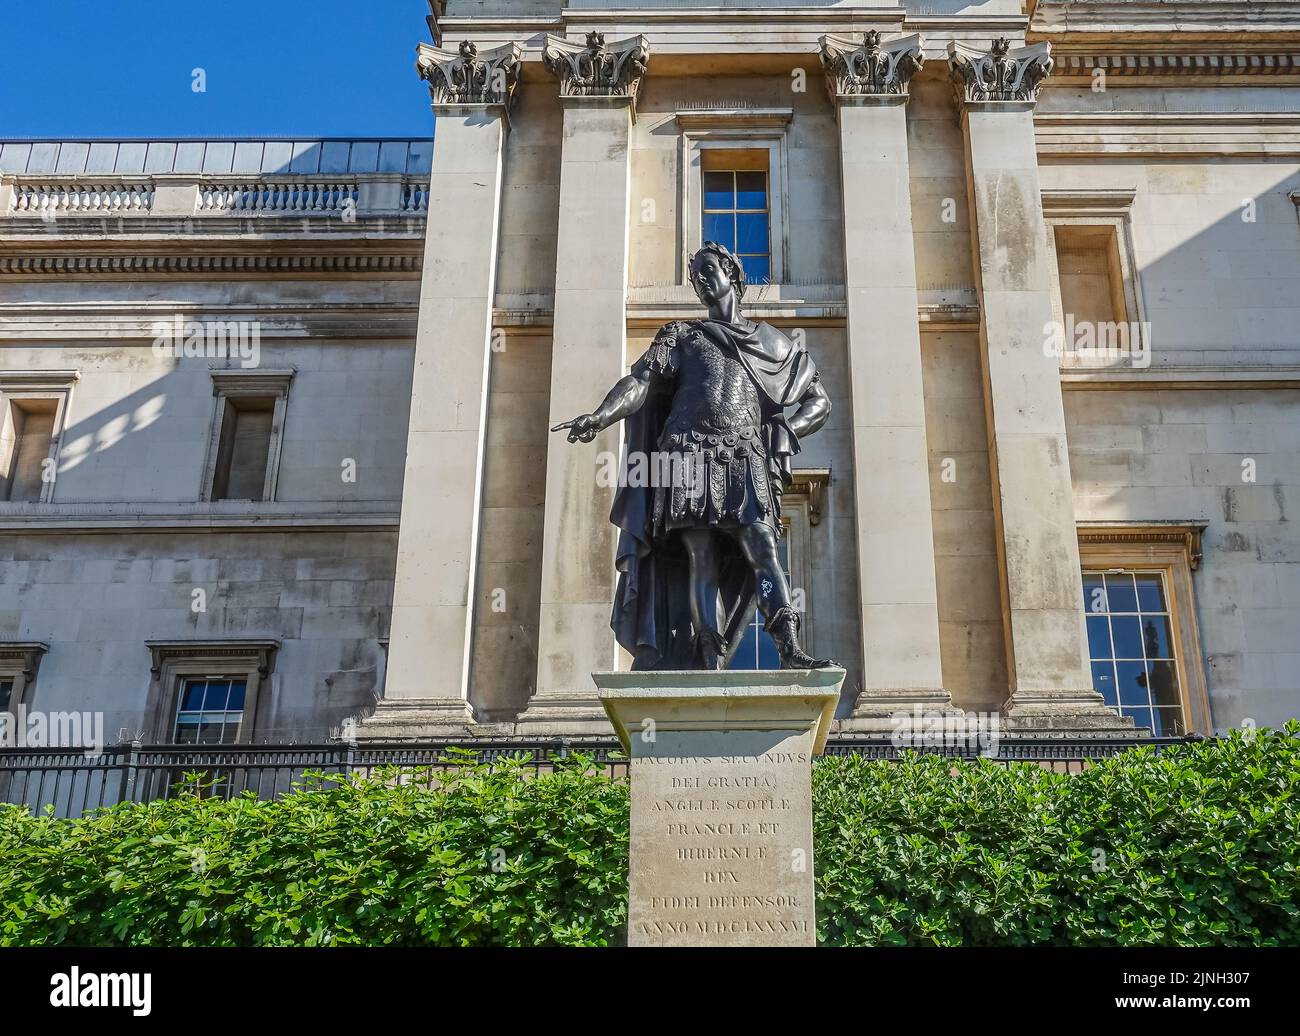 London, UK- July 4, 2022: Trafalgar Square. Jacobus Secundus, James II, statue set in front of green hedge and beige National Gallery facade. Image of Stock Photo